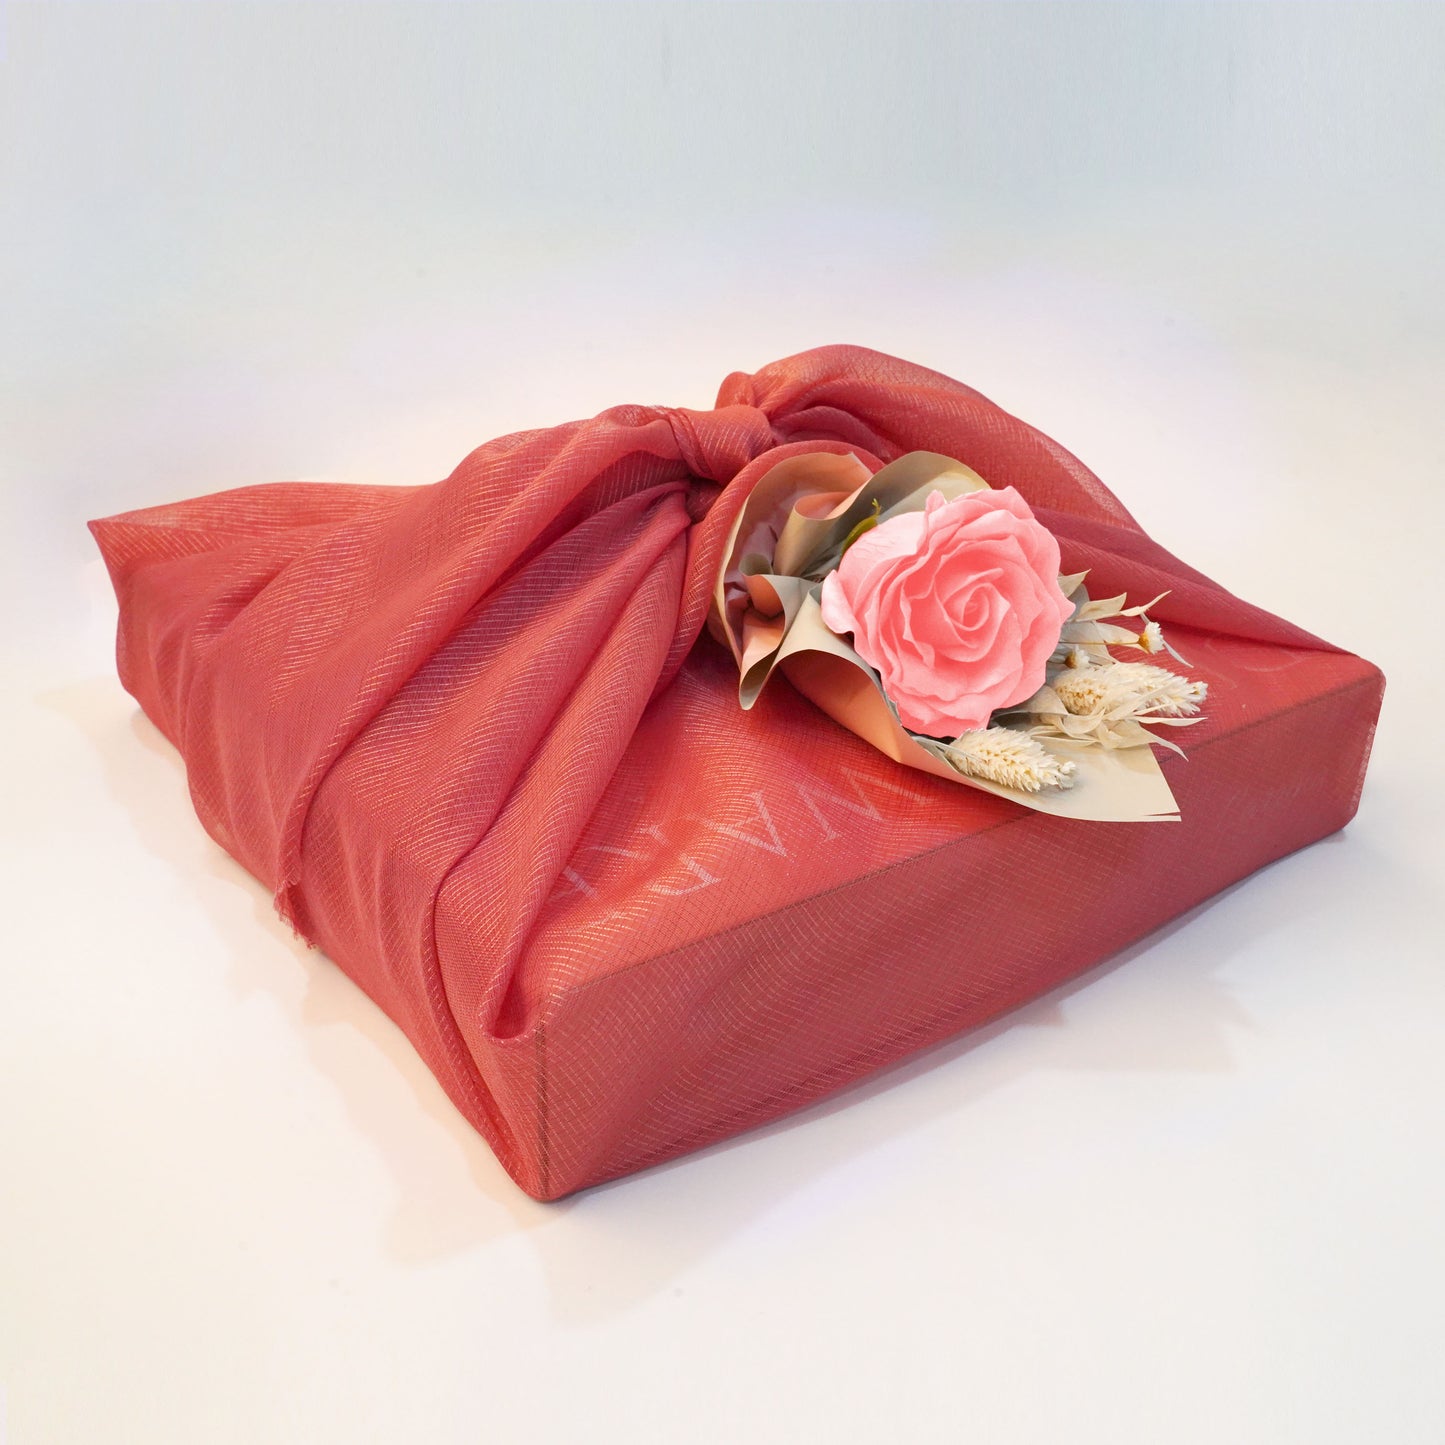 2 Pcs Personalised Mother's Day Rose Gift Set - Pink